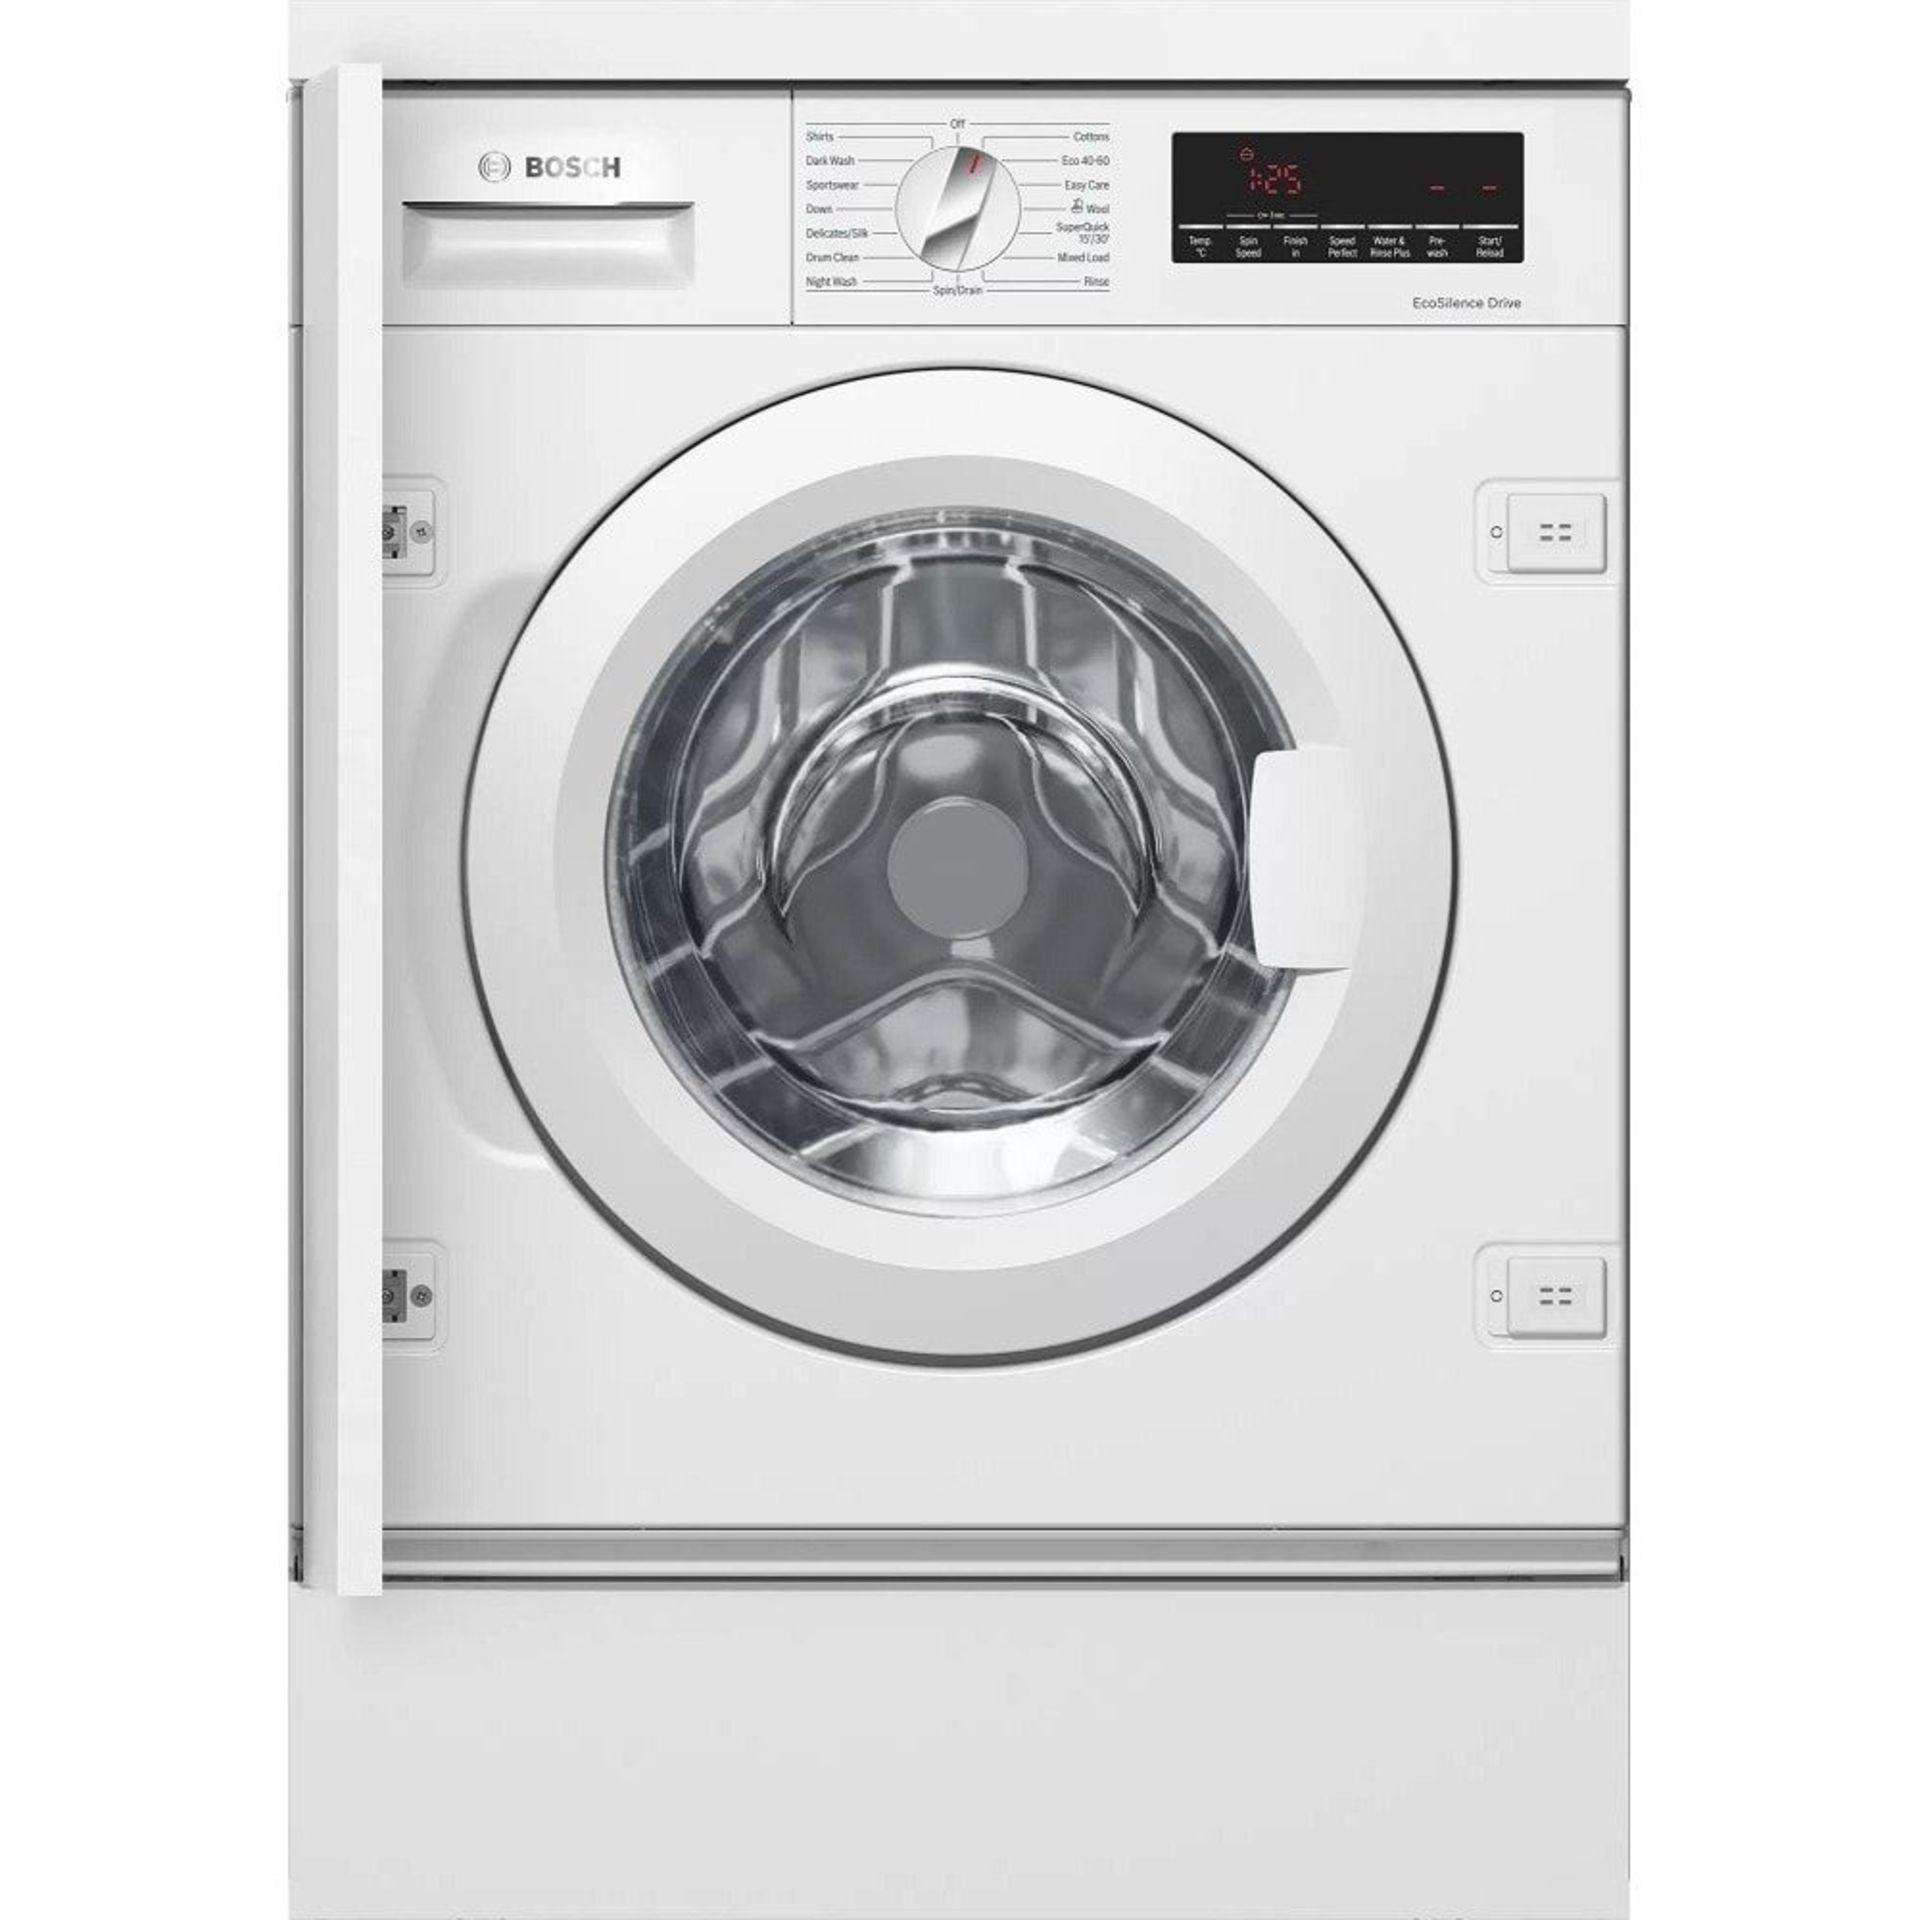 Bosch WIW28501GB Integrated Washing Machine. - H/S. RRP £919.00. Give your dirty clothes a new lease